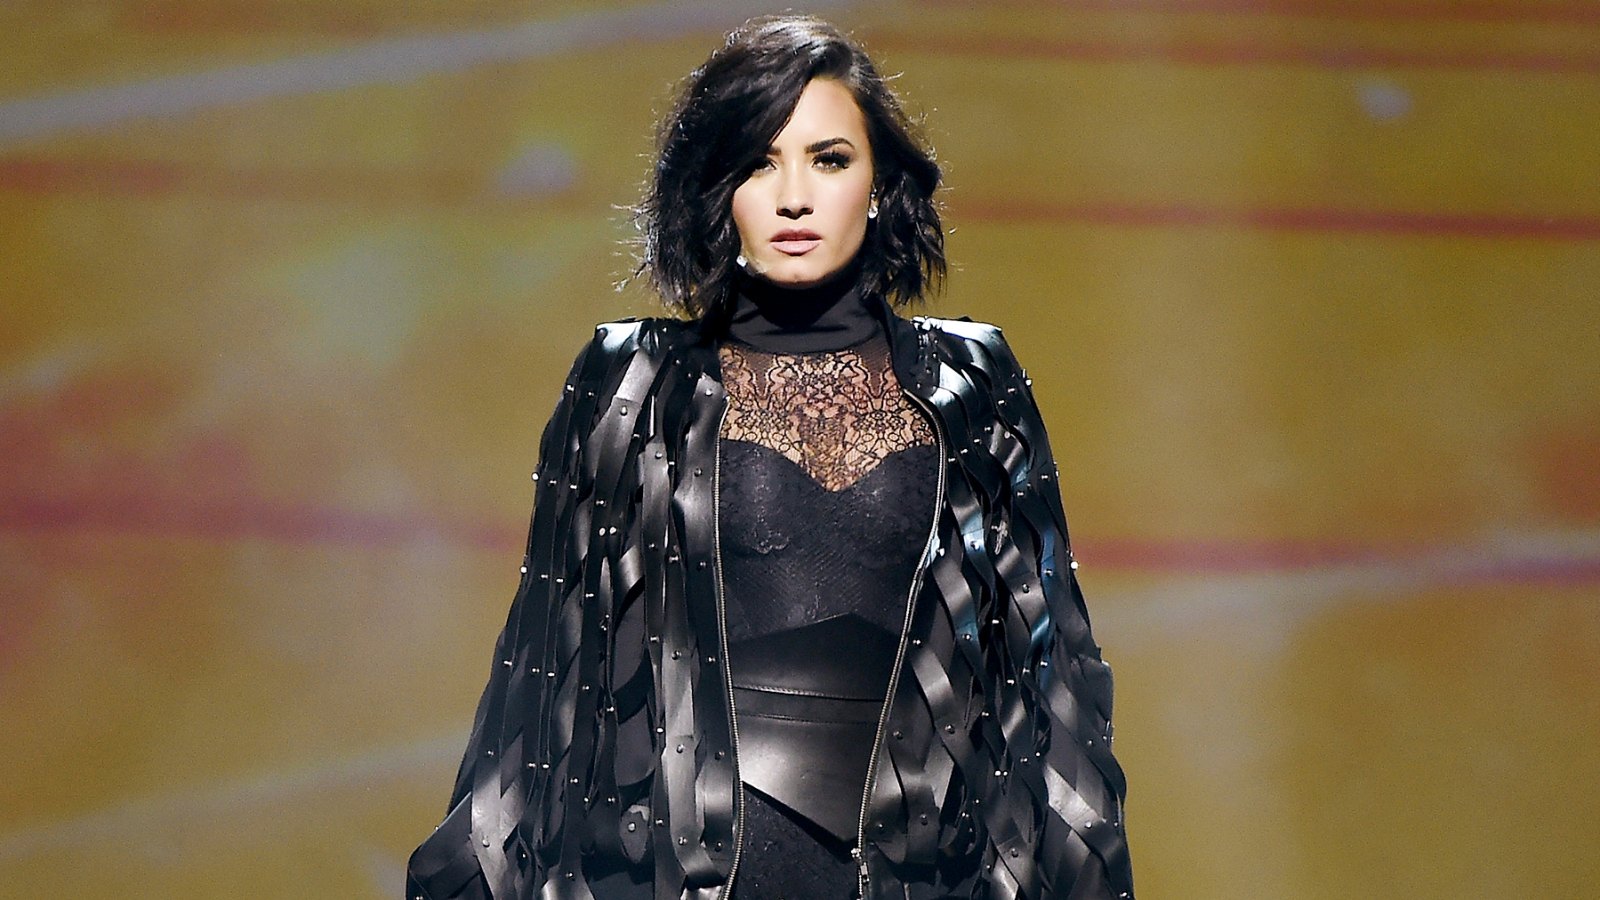 Demi Lovato performs during the '2016 Honda Civic Tour Featuring Demi Lovato & Nick Jonas: Future Now' tour at the Barclays Center on July 8, 2016 in New York City